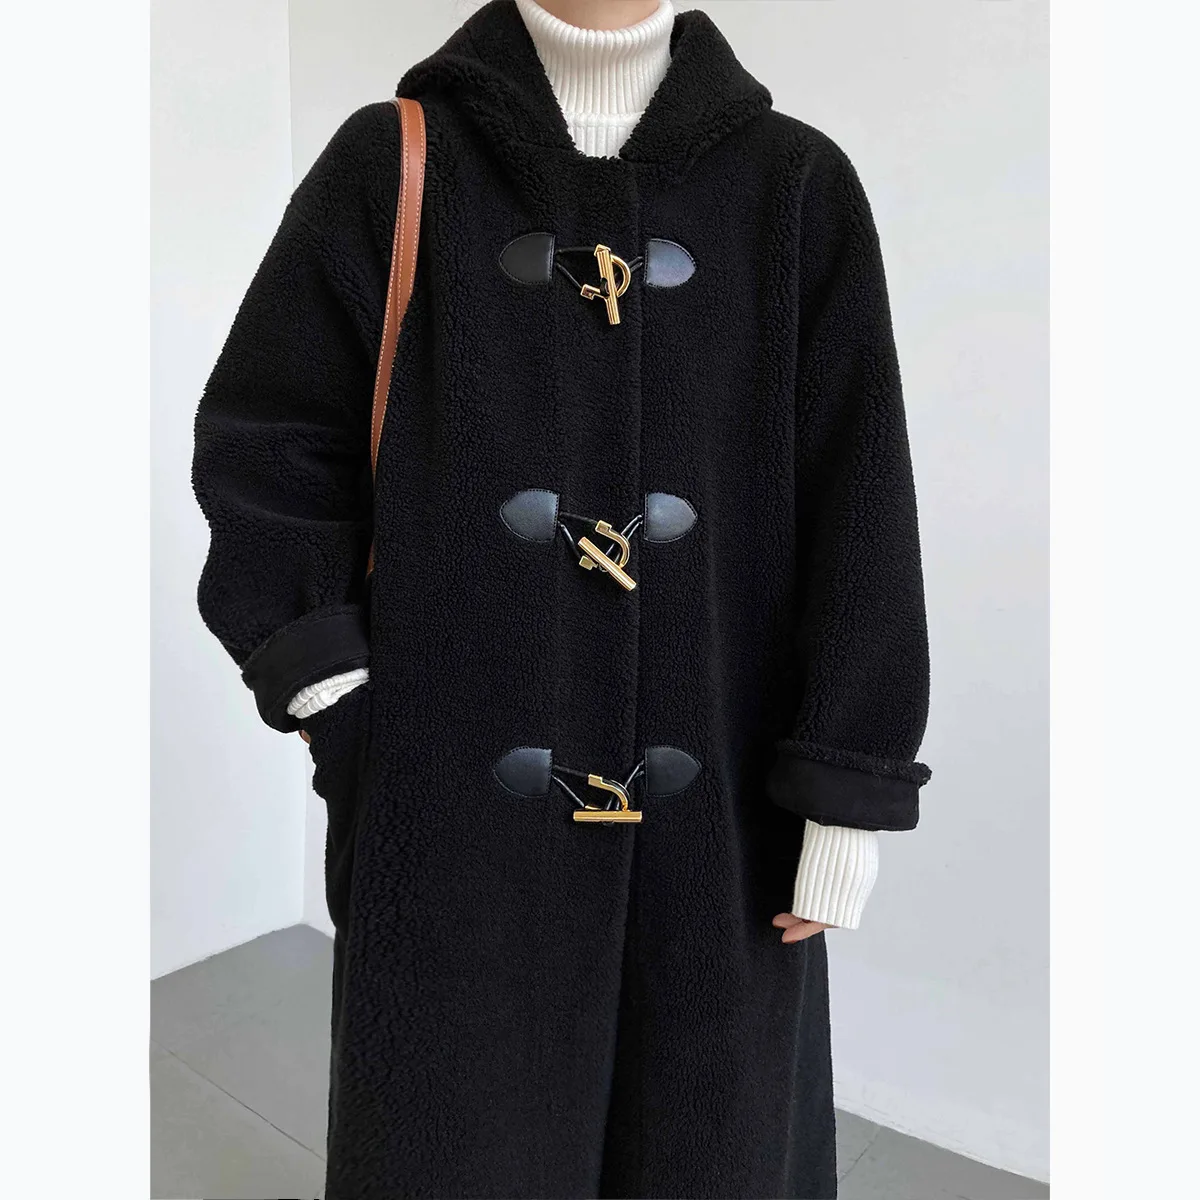 Autumn Winter Women's Horn Button Lamb Wool Coat Thickened Warm Loose Wear Mid-Length Hooded Fur Jacket